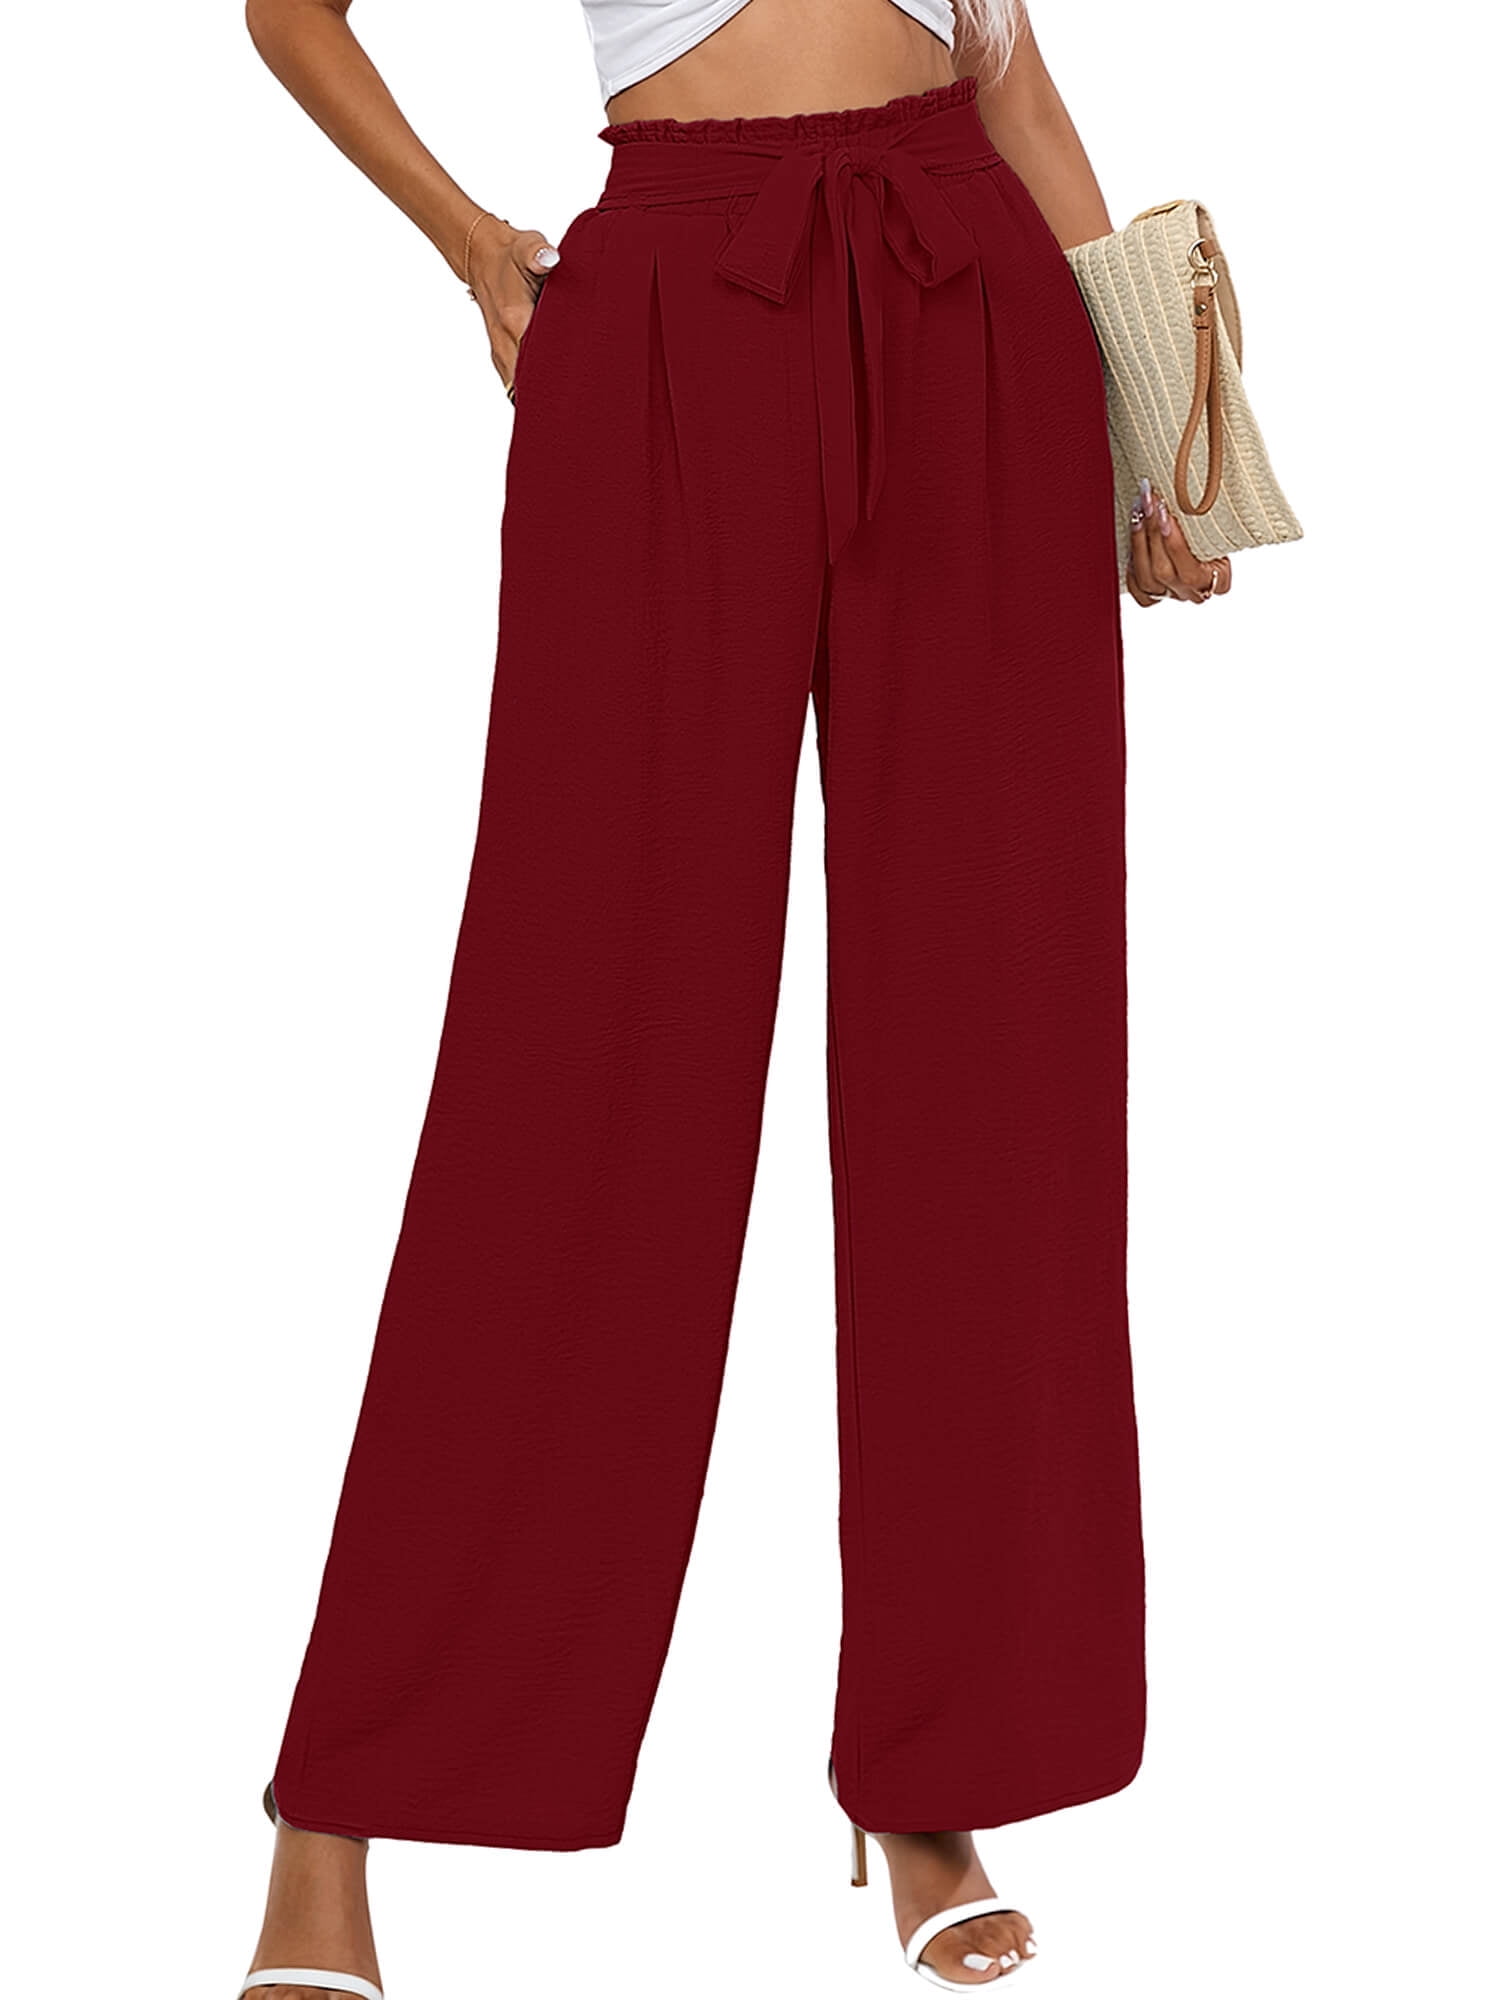 Chiclily Women's Wide Leg Lounge Pants with Pockets Lightweight